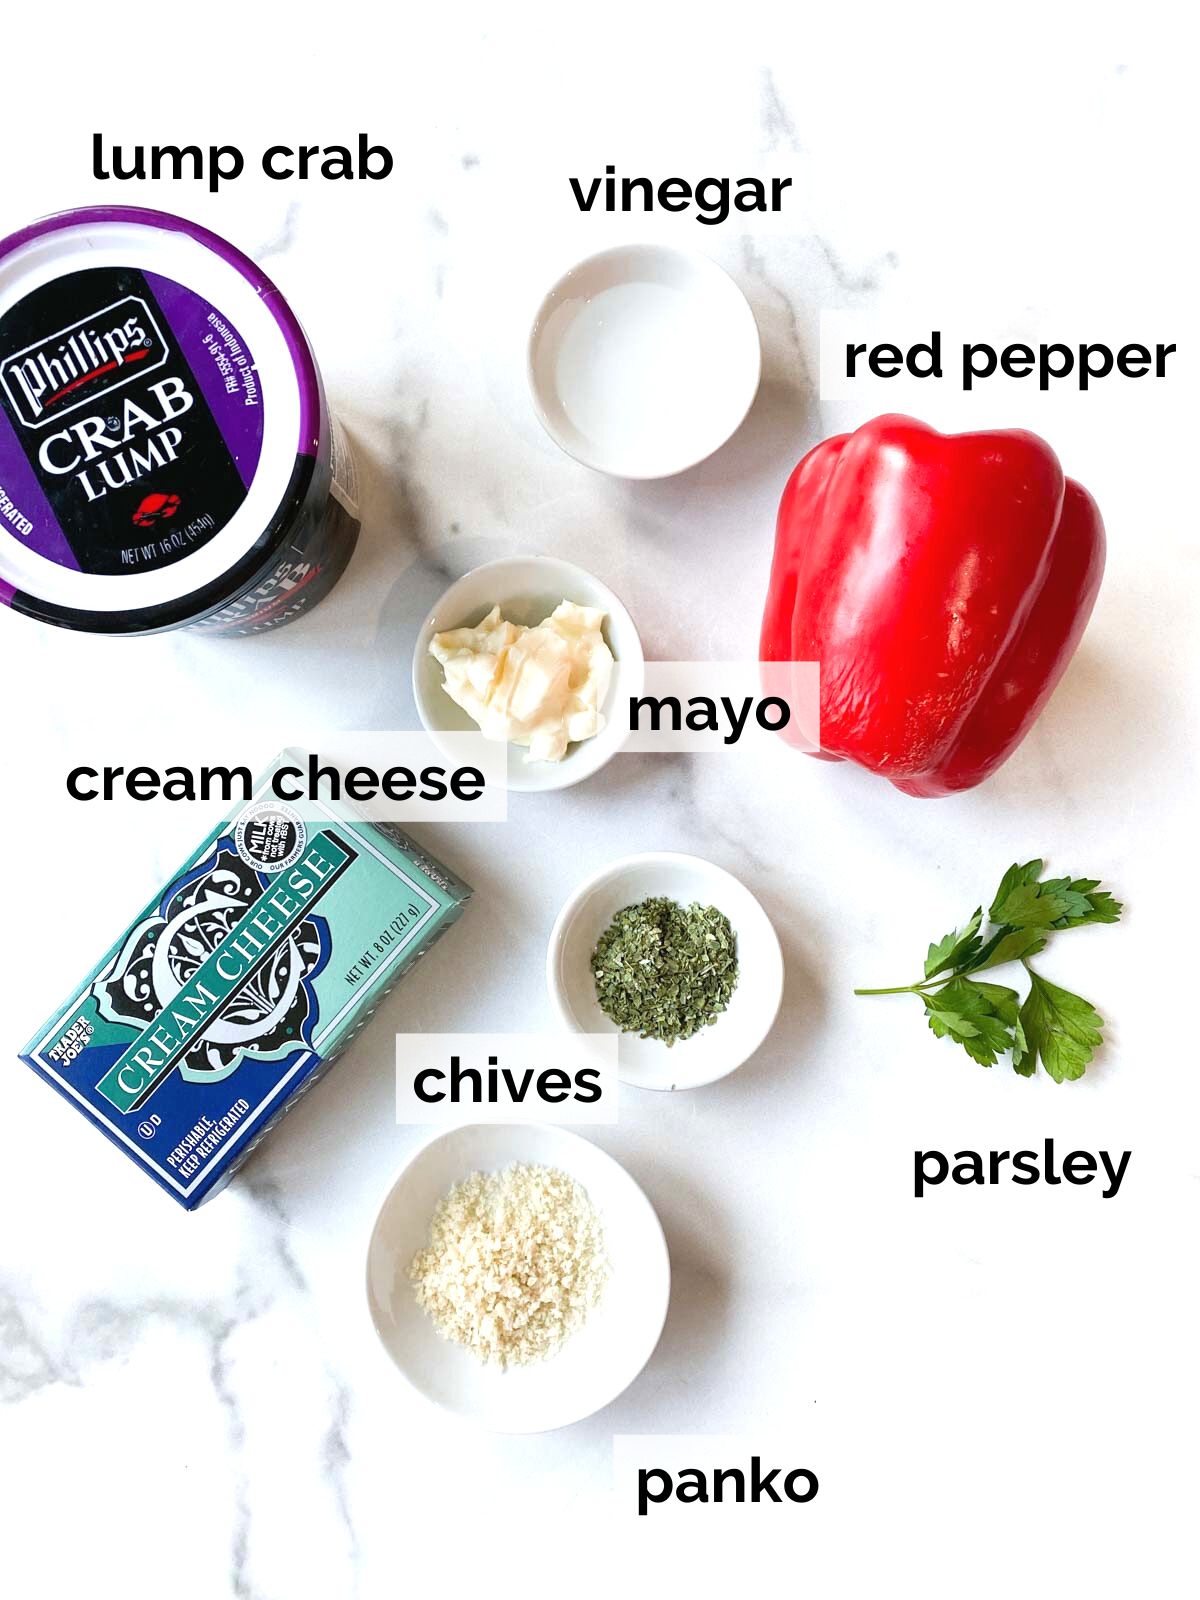 Ingredients for crab dip with cream cheese.